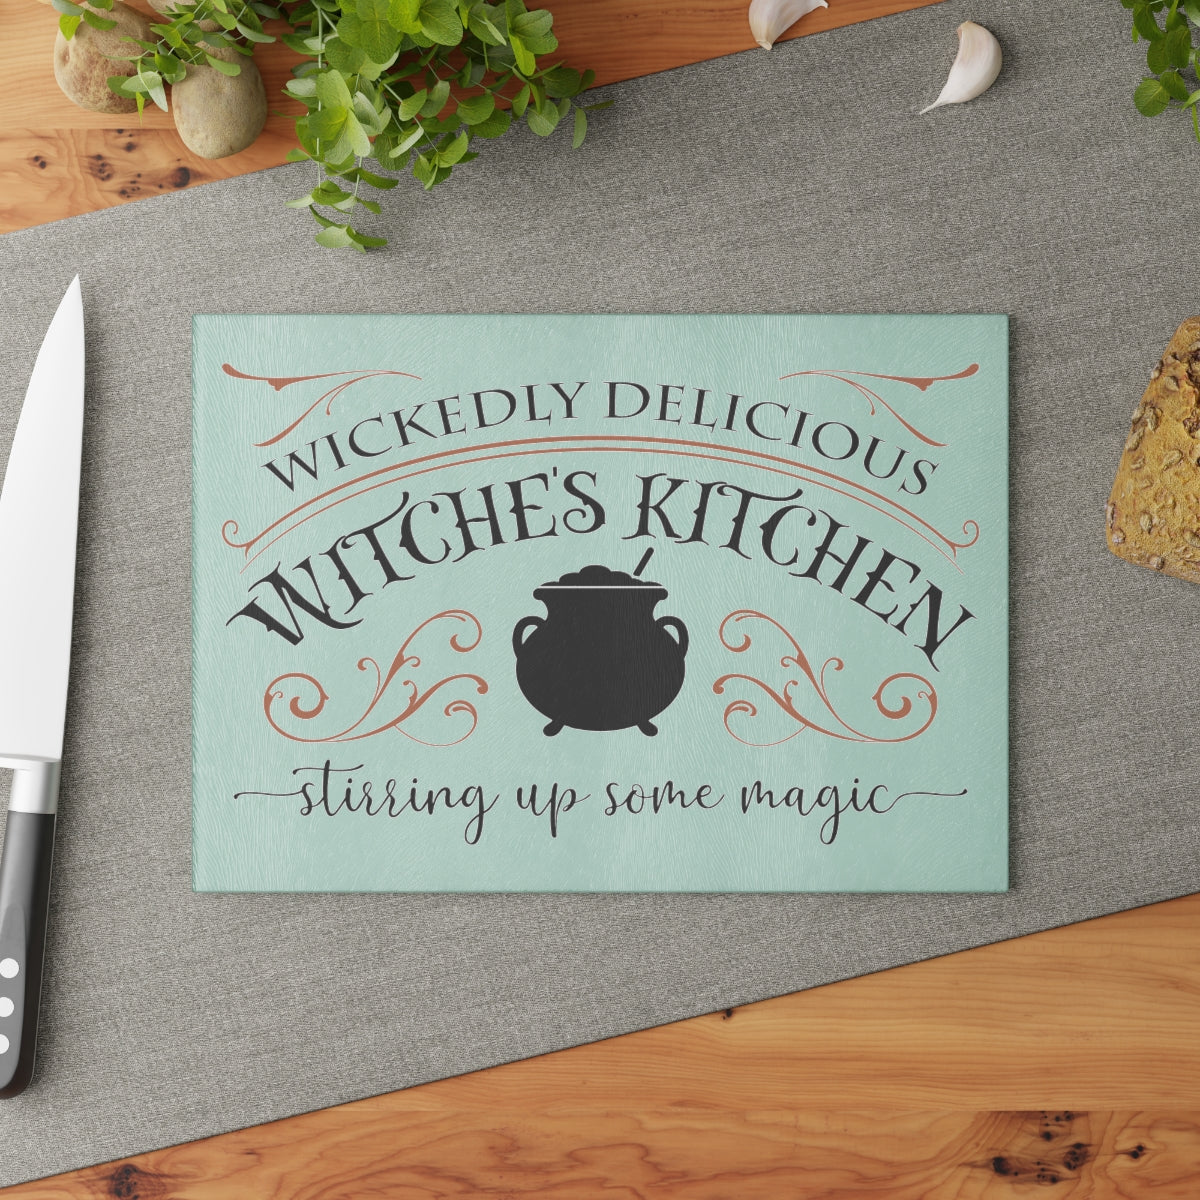 Wickedly Delicious Glass Cutting Board - Witchy Kitchens